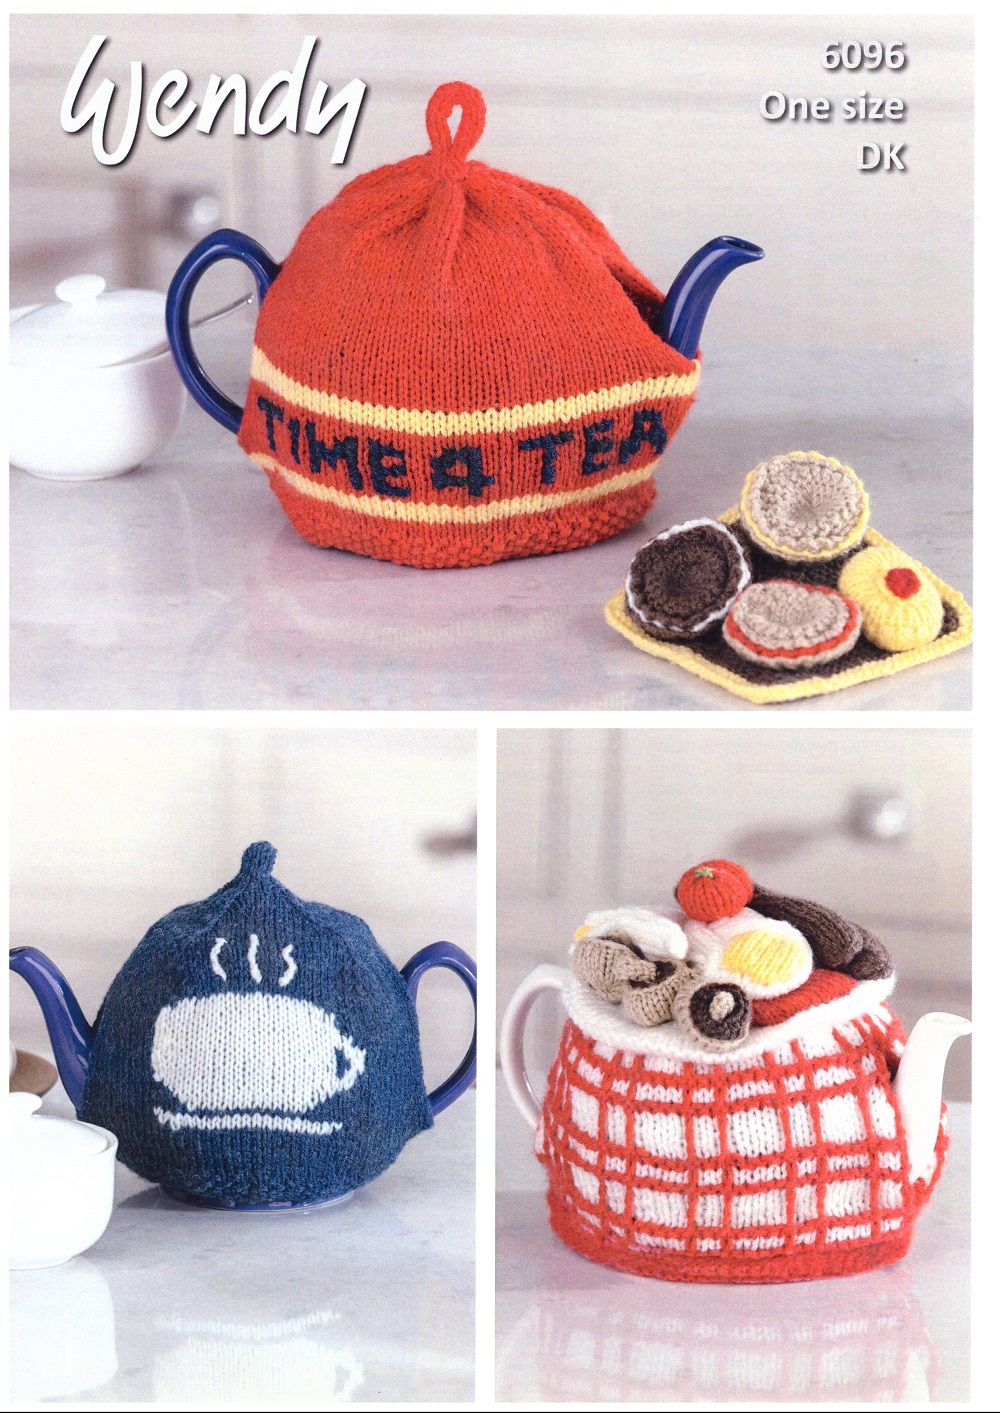 Patterns For Knitted Tea Cosies Wendy Tea Cosies Knitting Pattern In With Wool Dk 6096